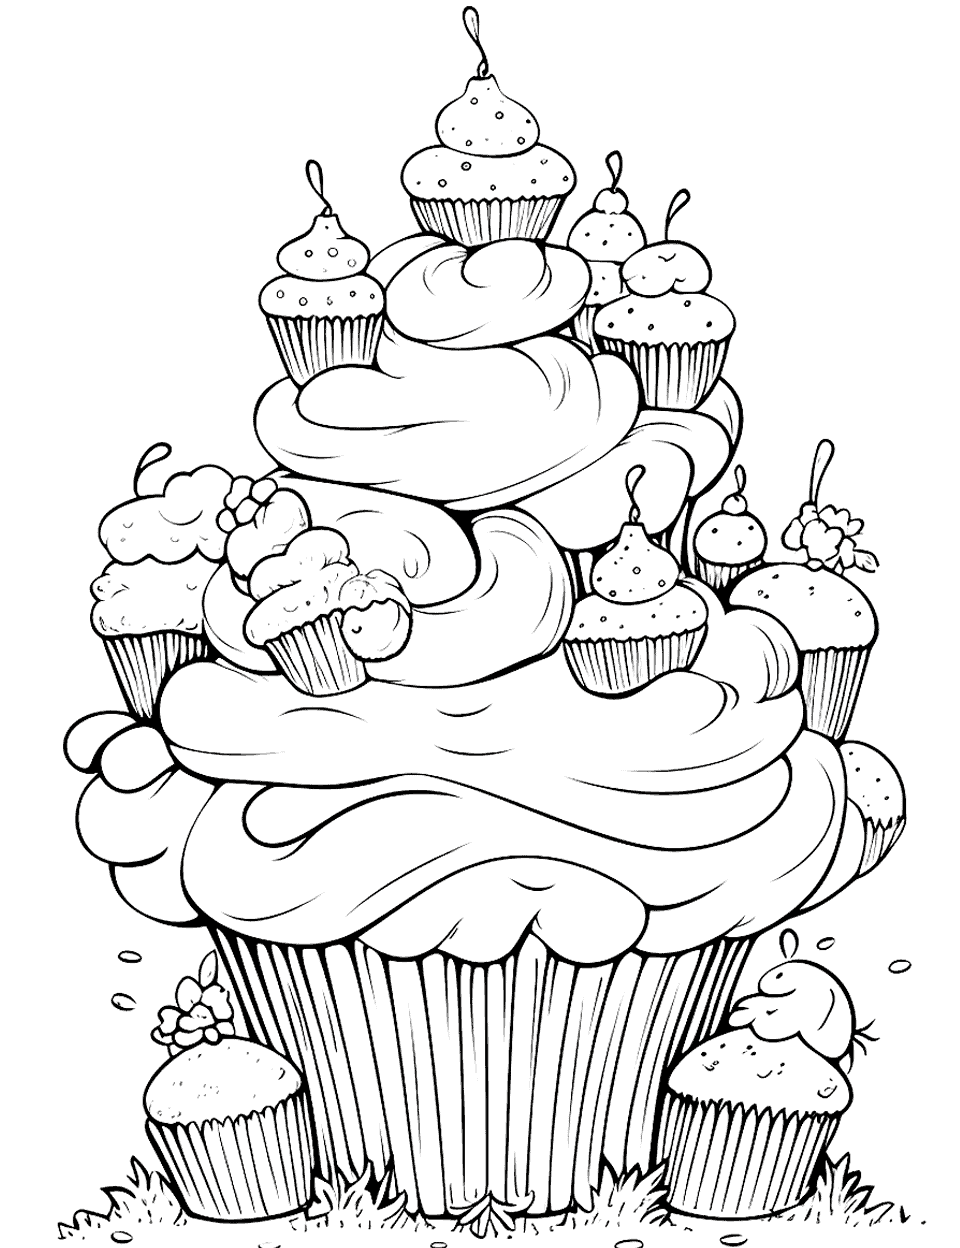 Cupcake Tree Coloring Page - A scene with cupcakes arranged like tree branches.